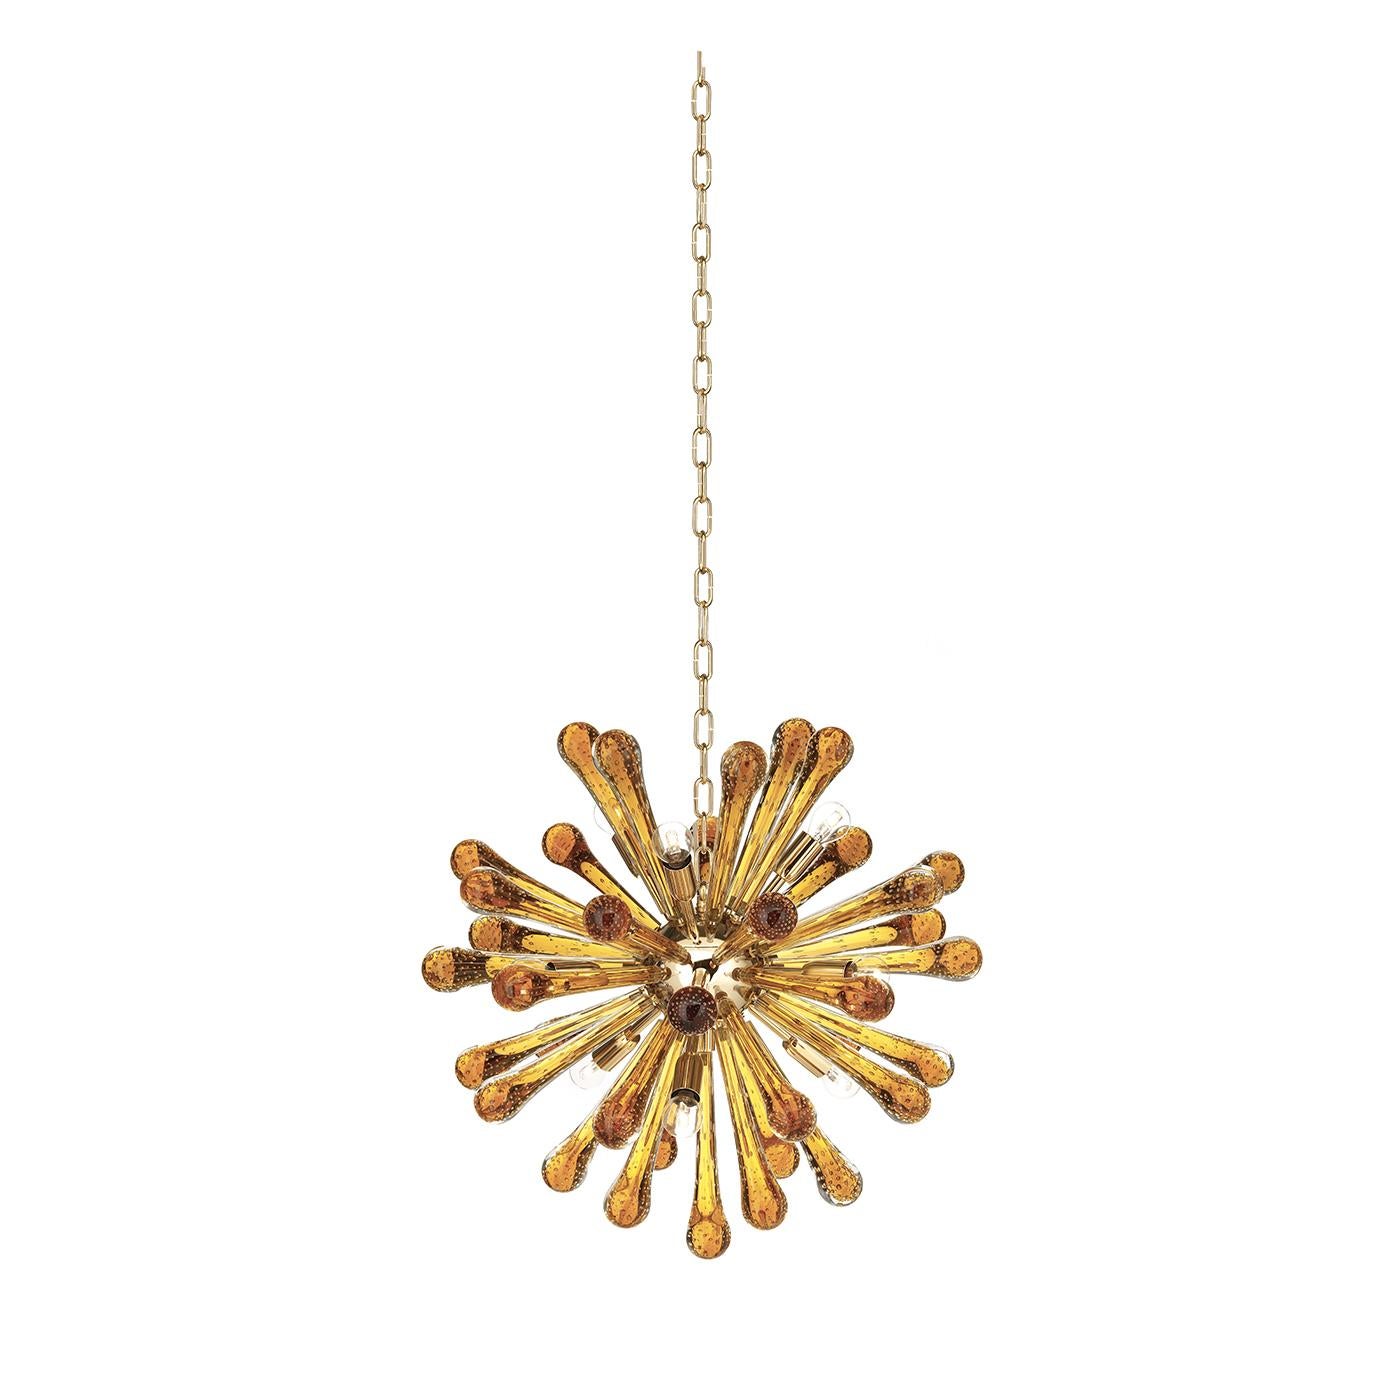 The decoration of this colorful and striking chandelier is entirely made of Murano mouth-blown glass, suspended from the ceiling on a metal chain. The central core of the piece is a metal sphere on which nine E14 x W LED lightbulbs on conical